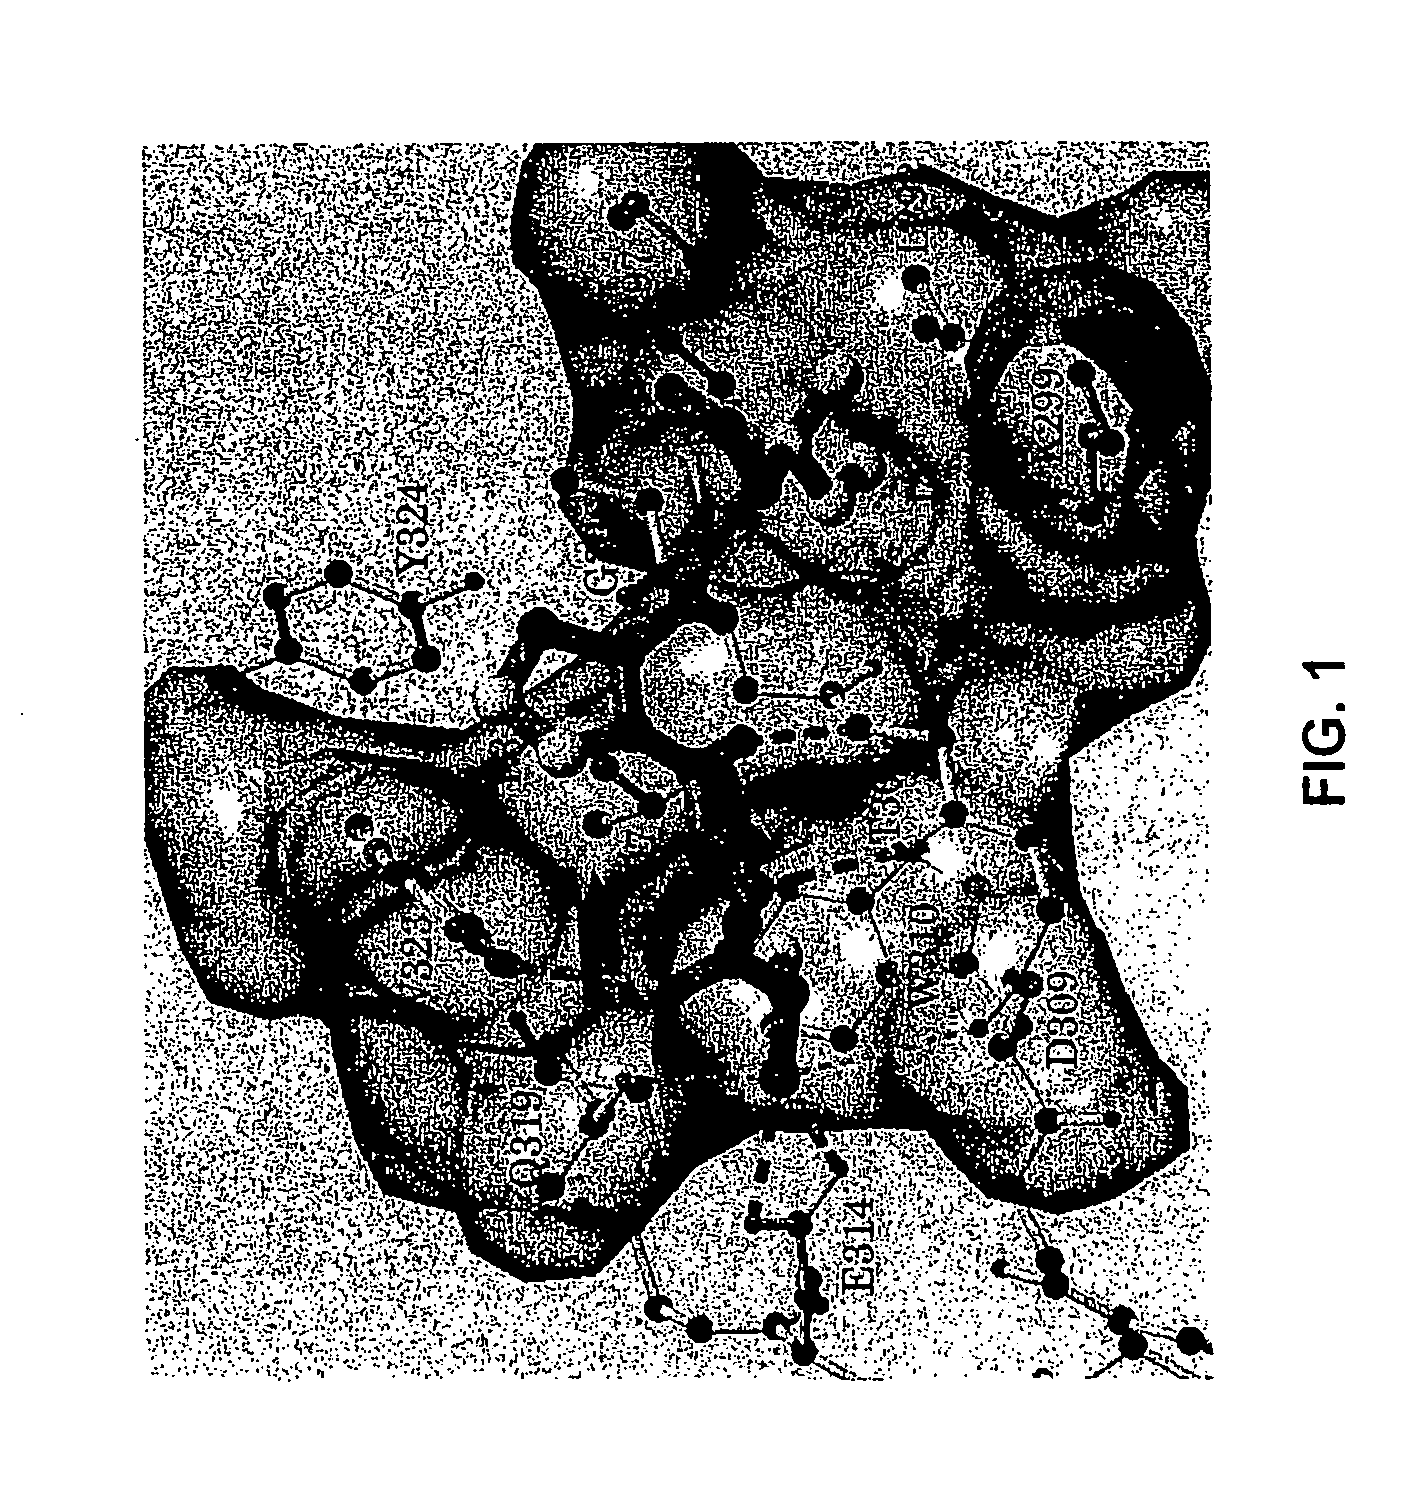 Conformationally Constrained Smac Mimetics and the Uses Thereof